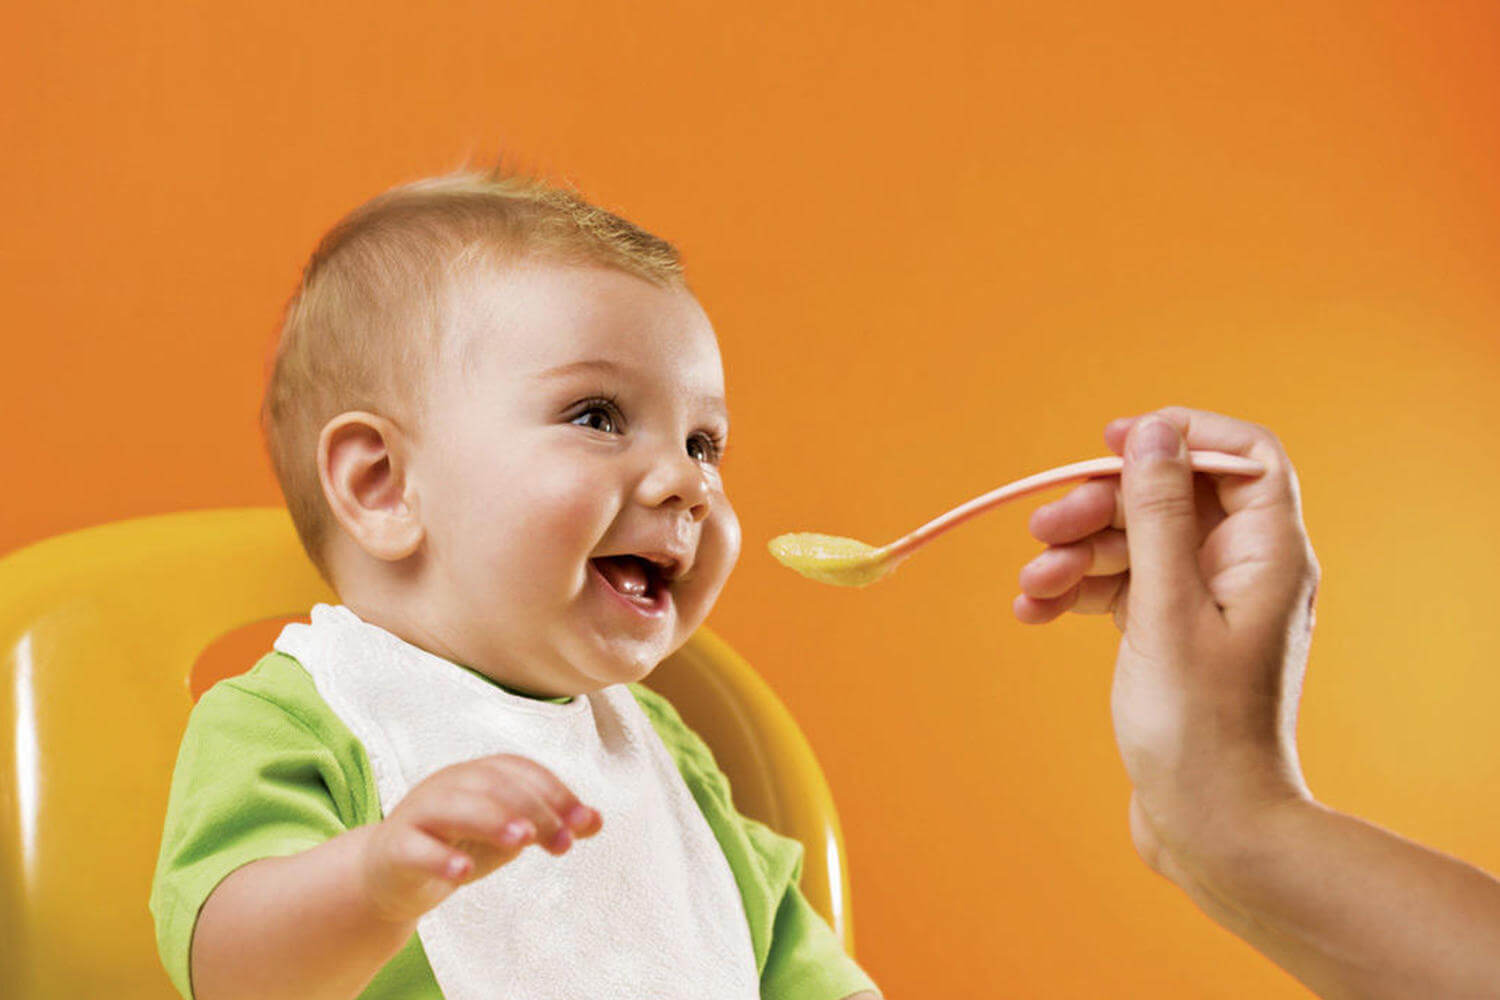 make sure your baby has a good relationship with food